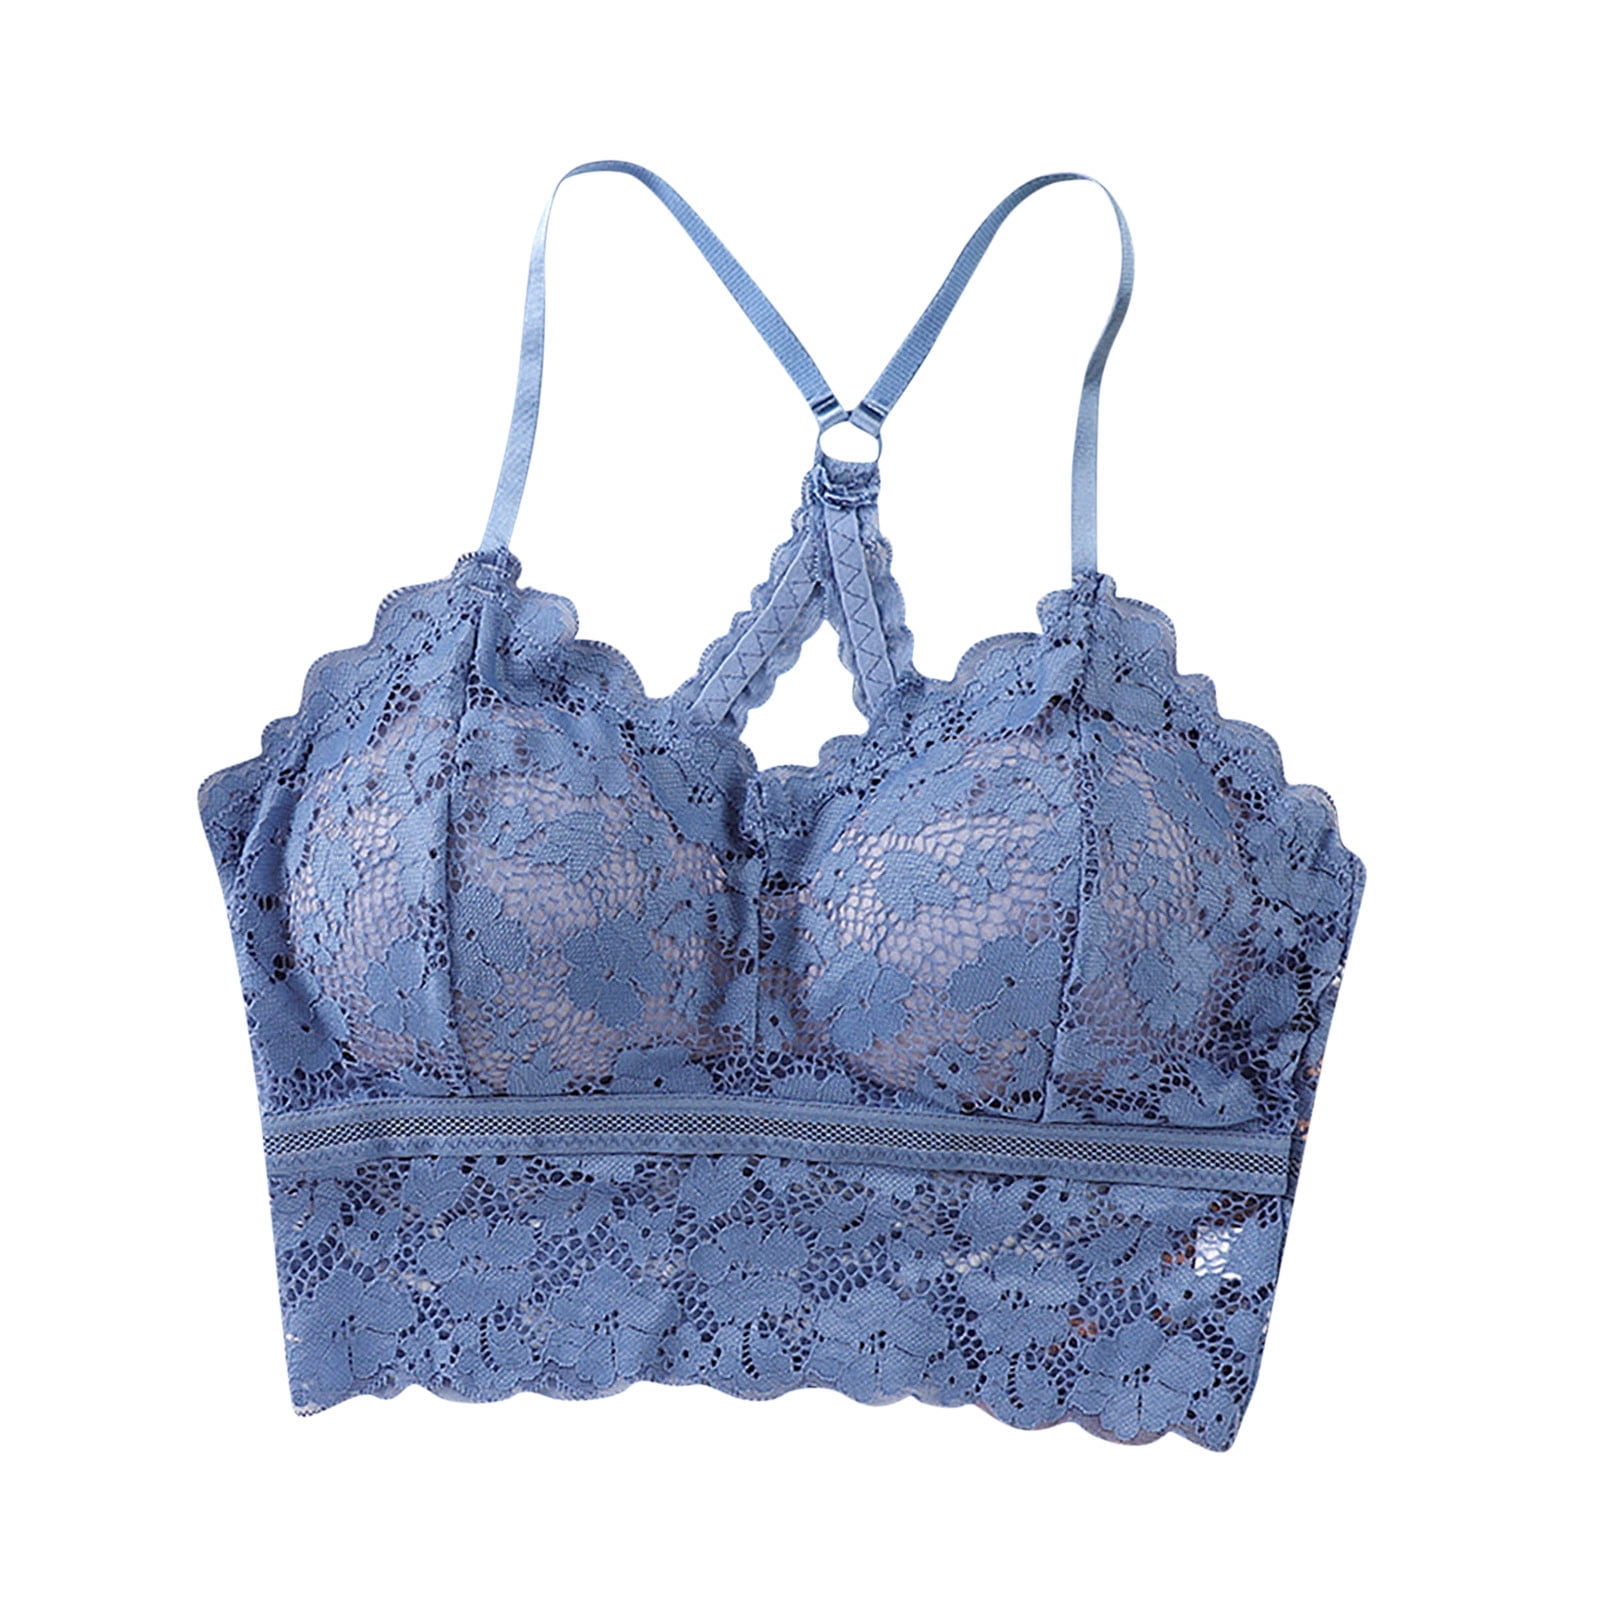 Padded underwired lace bra - Light blue - Ladies